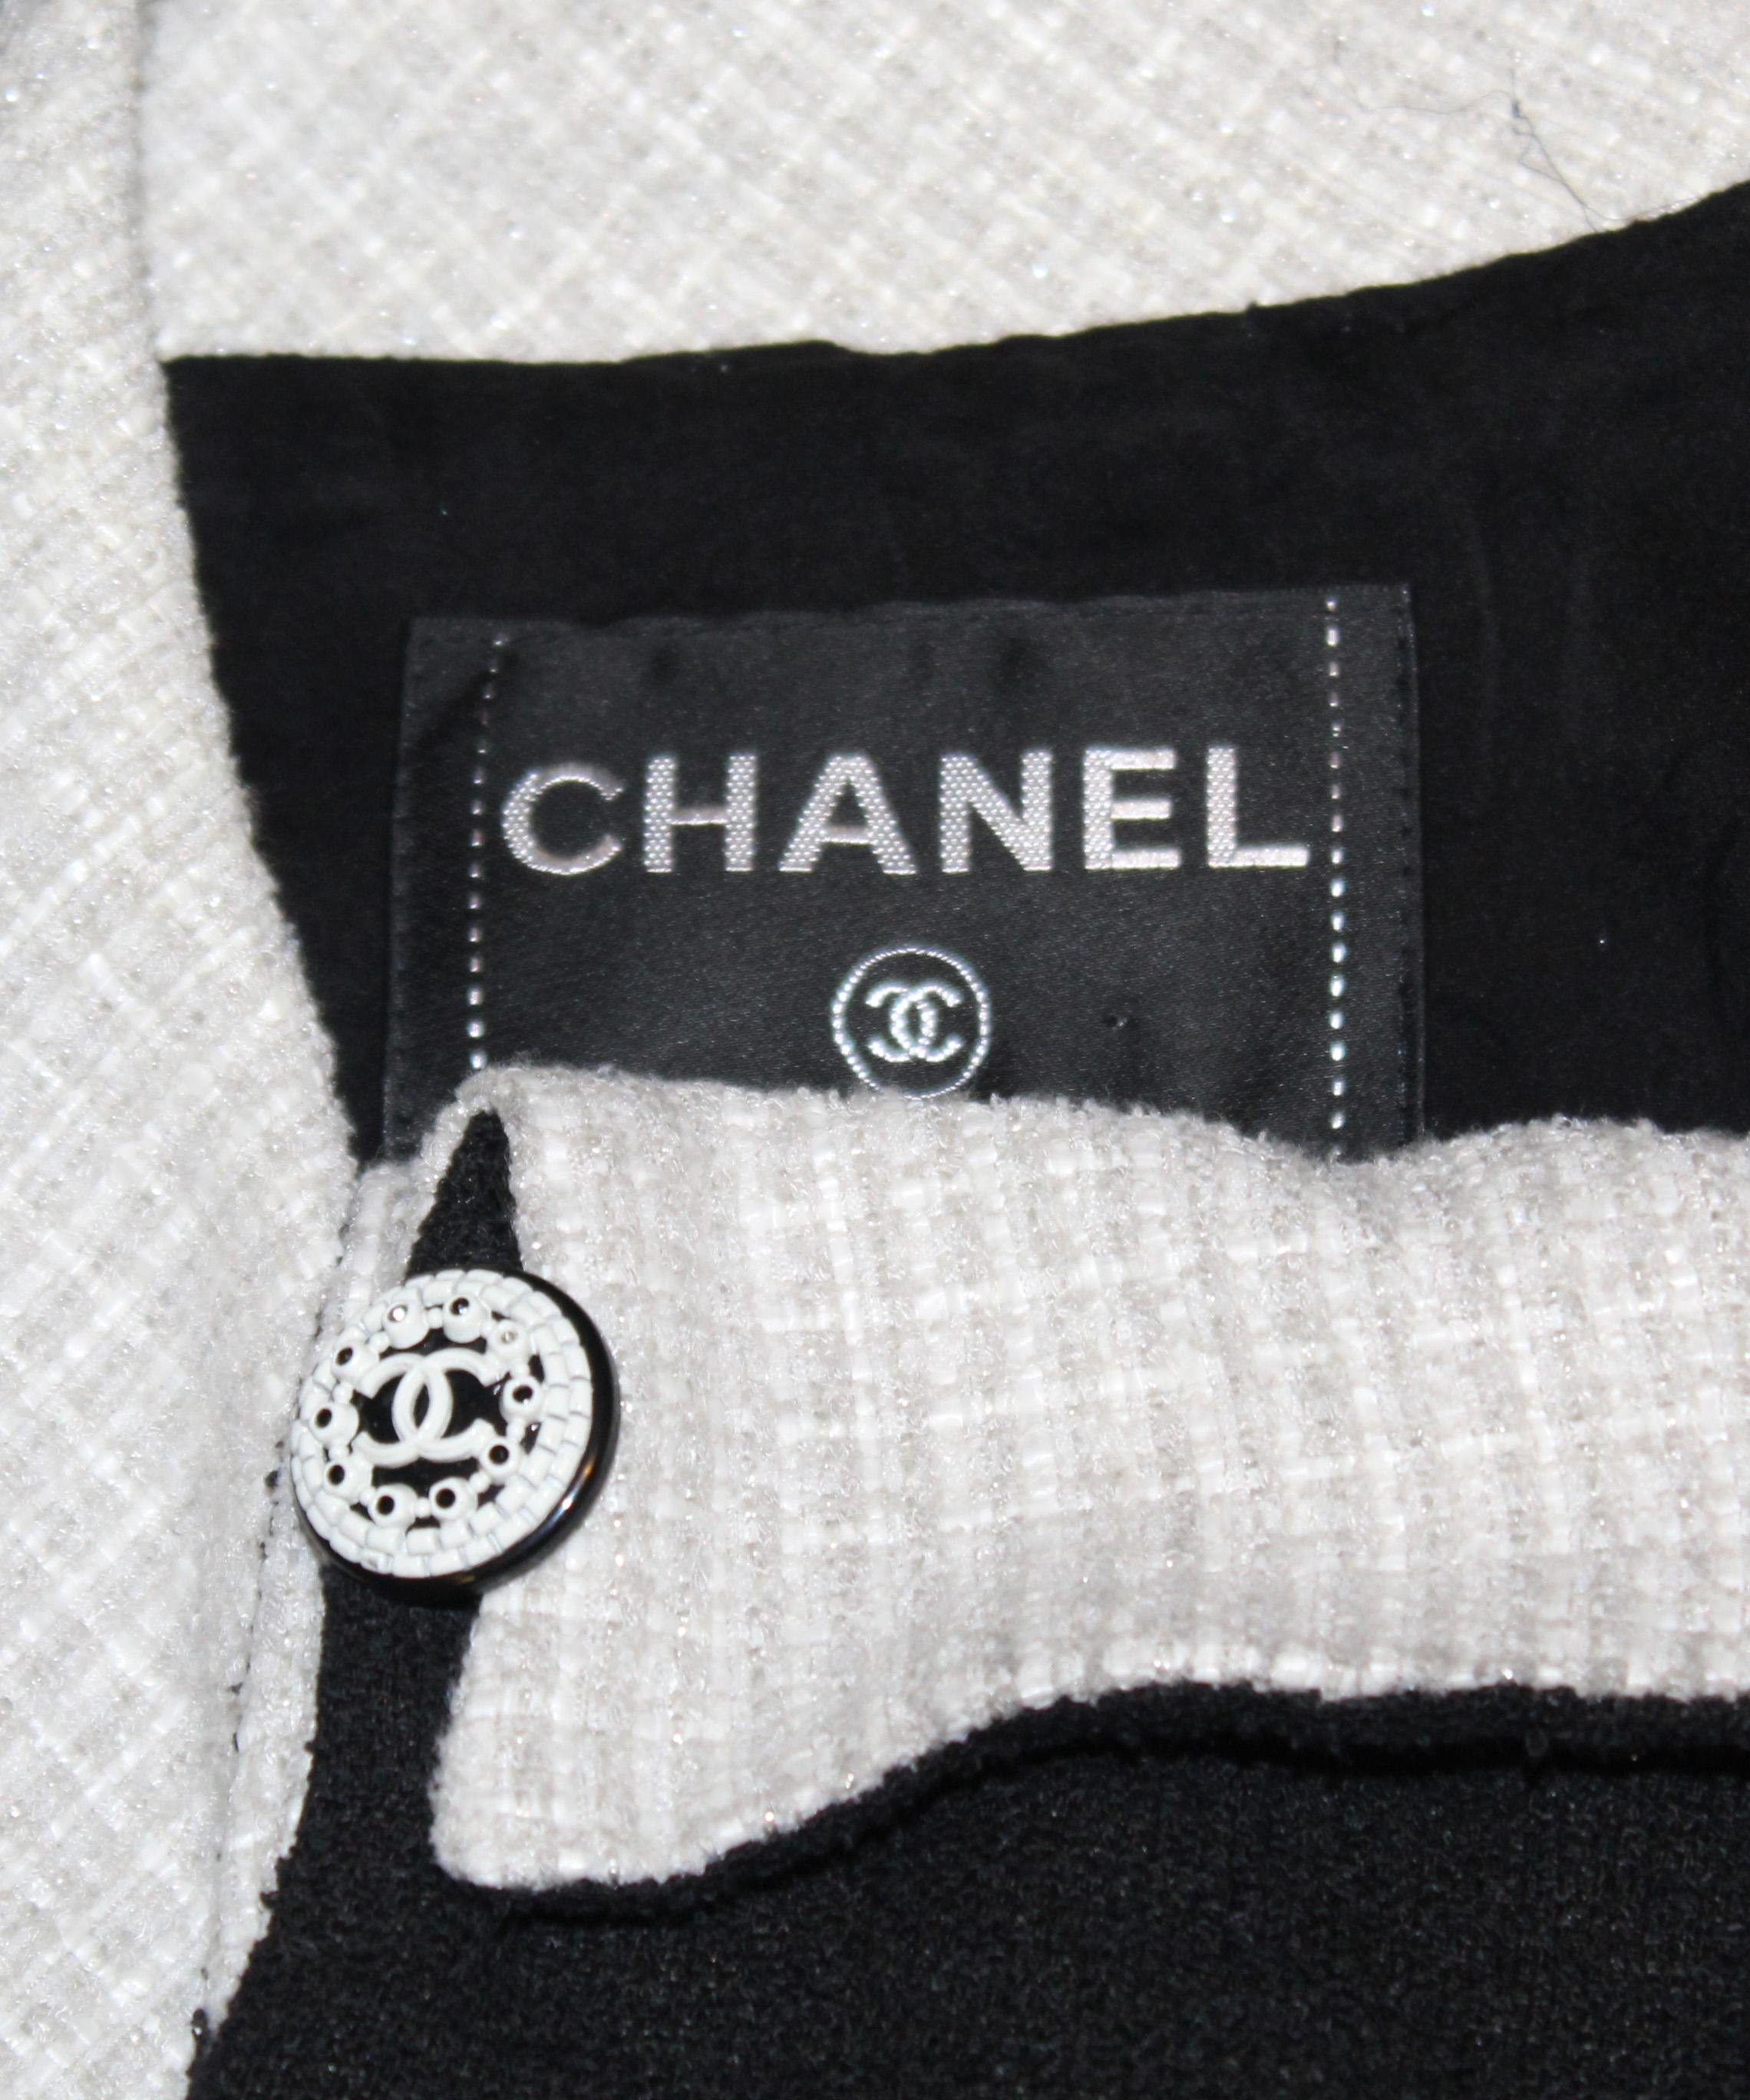 Chanel 2009 tweed wool blend black and ivory dress features silver threads throughout ivory color fabric.  This Chanel tweed sleeveless dress has a black tweed bow across bust line contrasting with the ivory fabric.  The dress has a drop waistline,